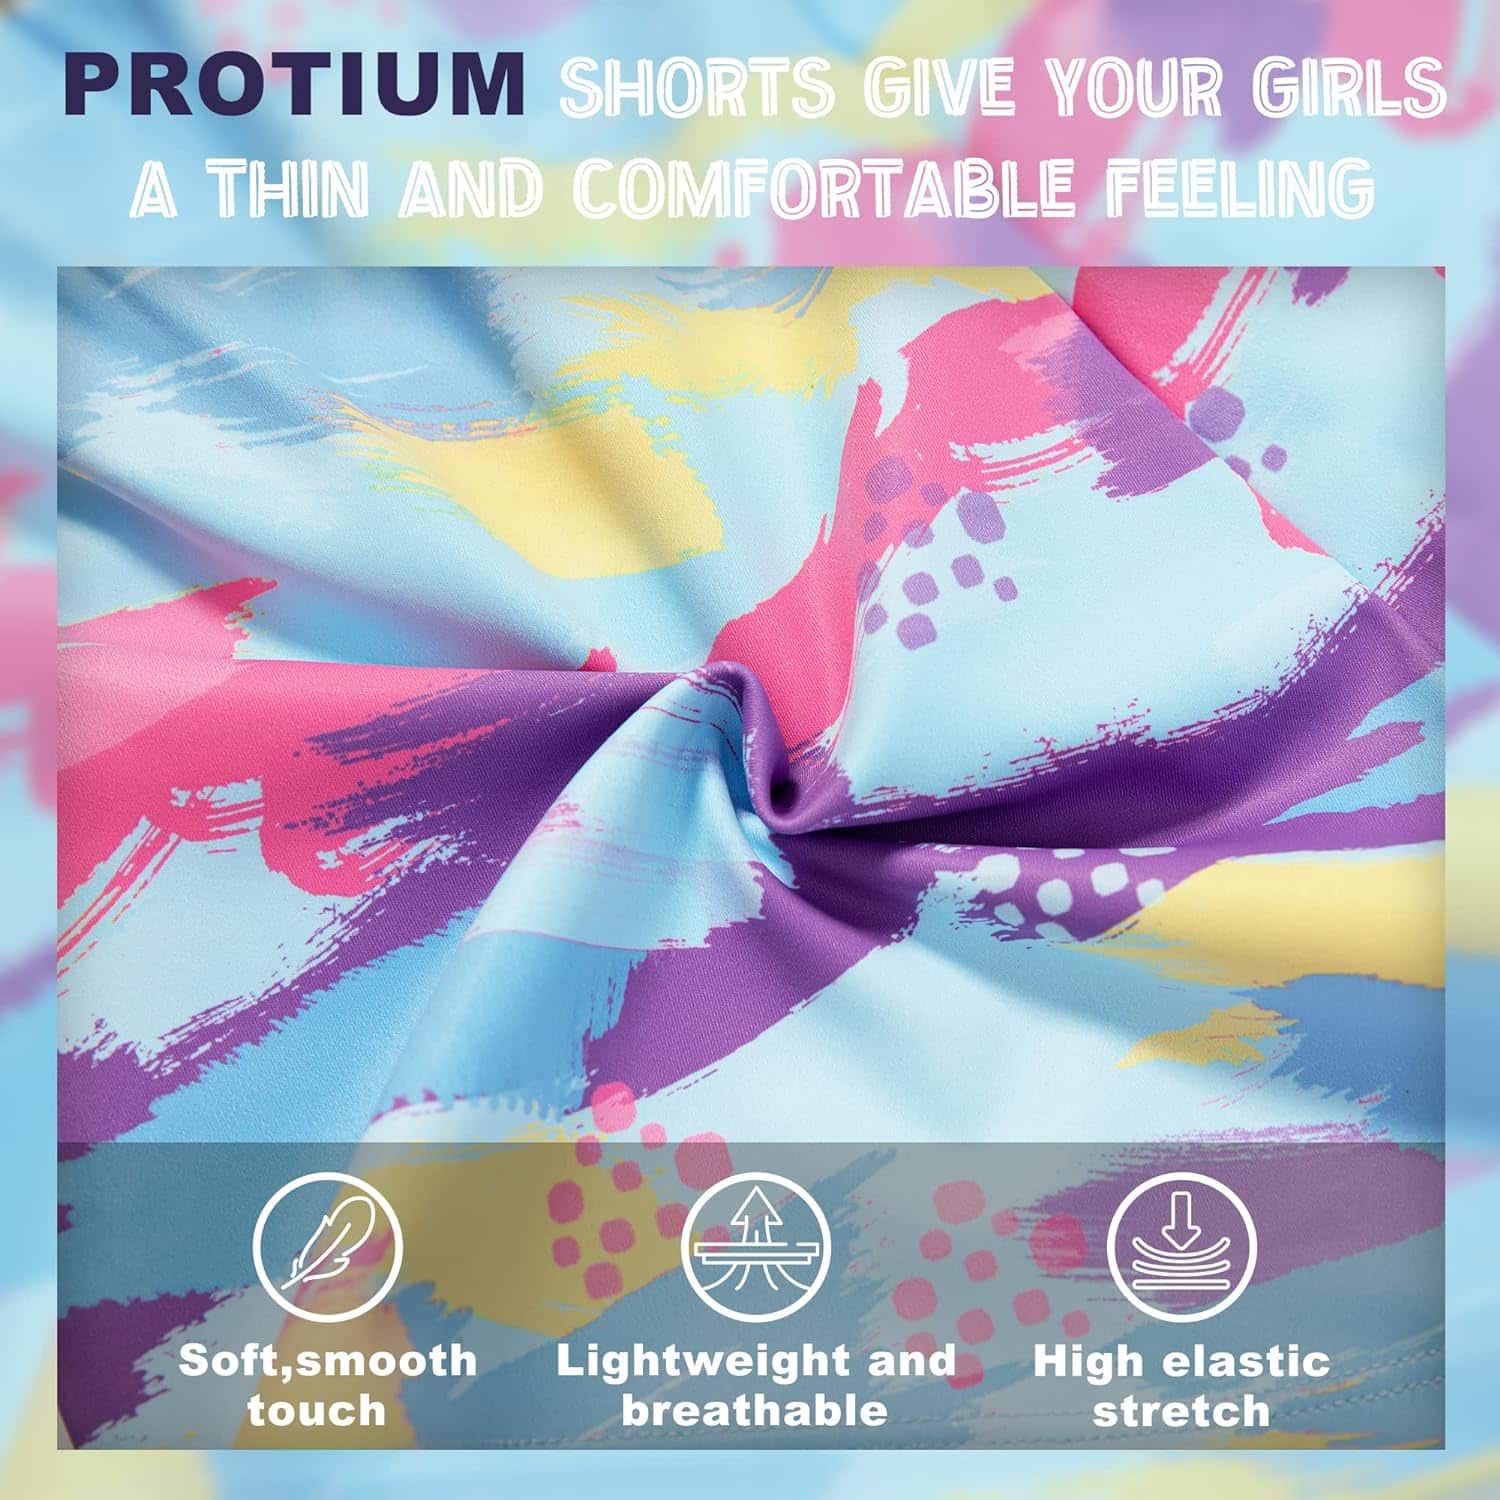 PROTIUM Soccer Athletic Shorts for Teen Girls: A Review of Style and Comfort